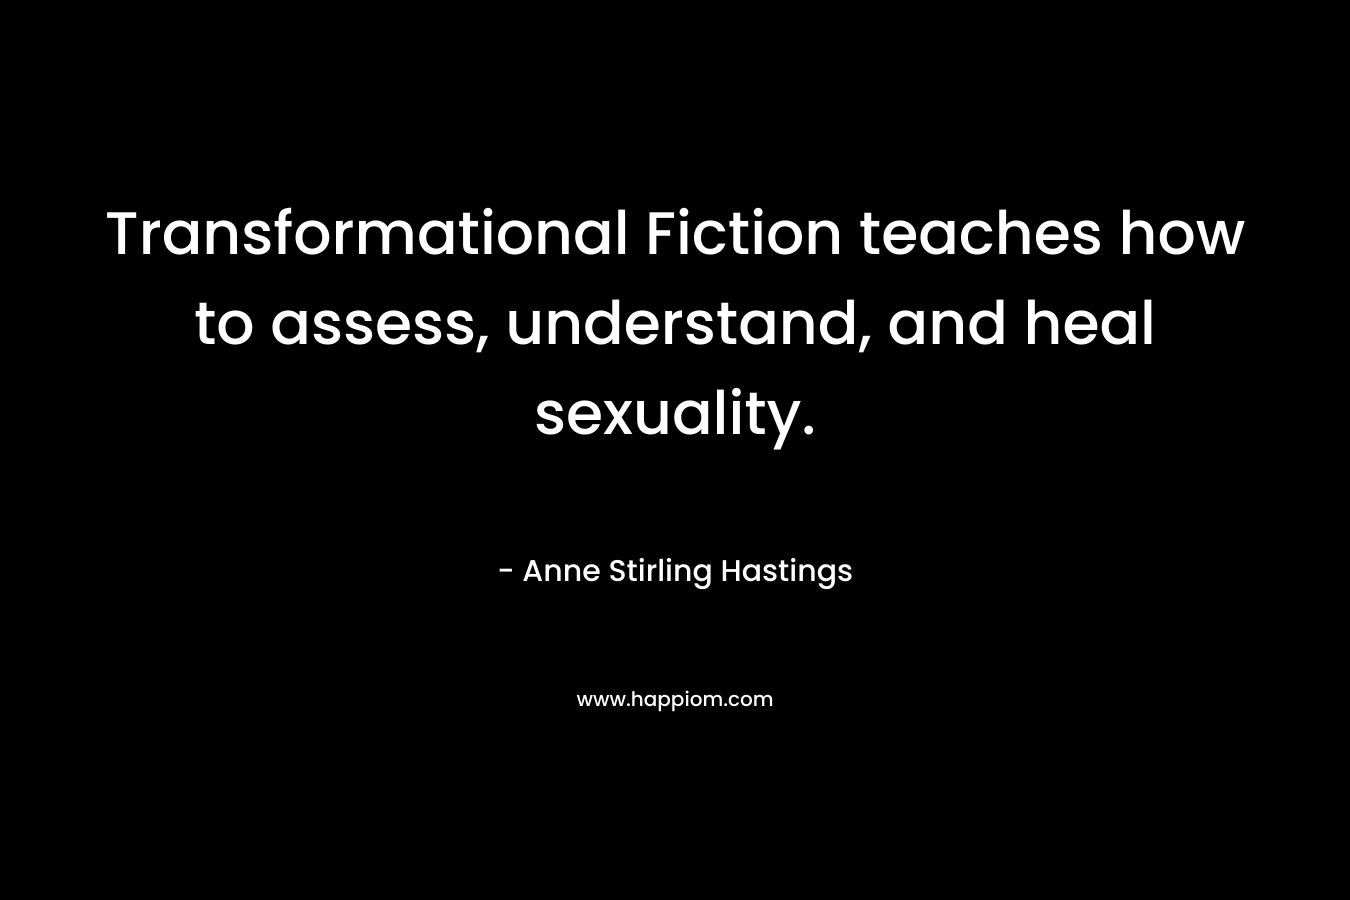 Transformational Fiction teaches how to assess, understand, and heal sexuality. – Anne Stirling Hastings